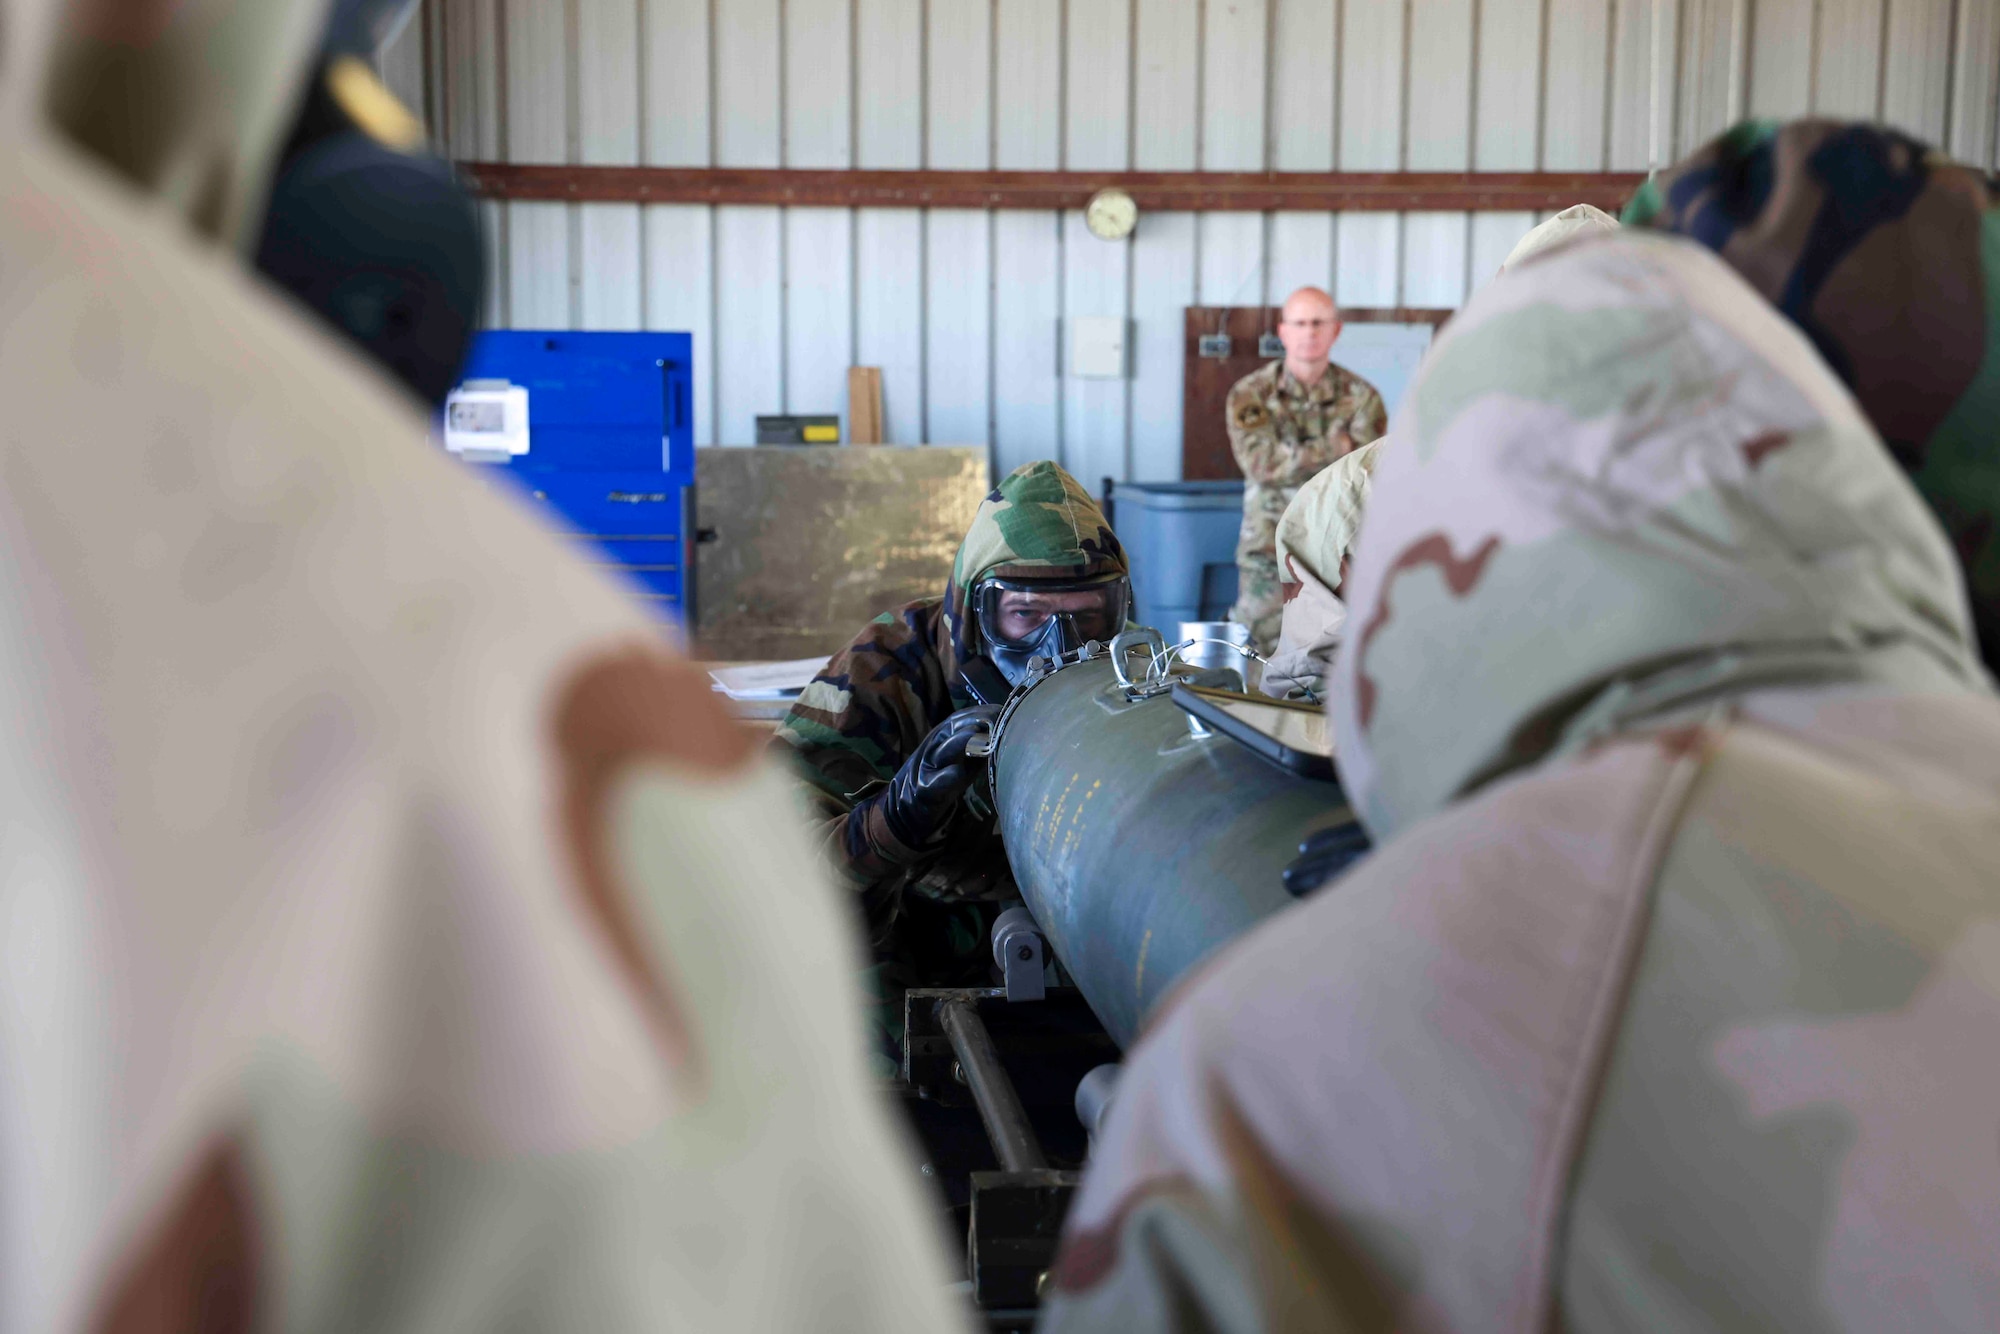 U.S. Air Force Airmen from Whiteman Air Force Base, Missouri, 509th Munitions Squadron, build GBU-54 munitions in MOPP gear to simulate continuing warfighting capabilities in the event of a CBRN attack during the Air Force Combat Operations Competition (AFCOCOMP), Aug. 23, 2023, at Beale AFB, California.